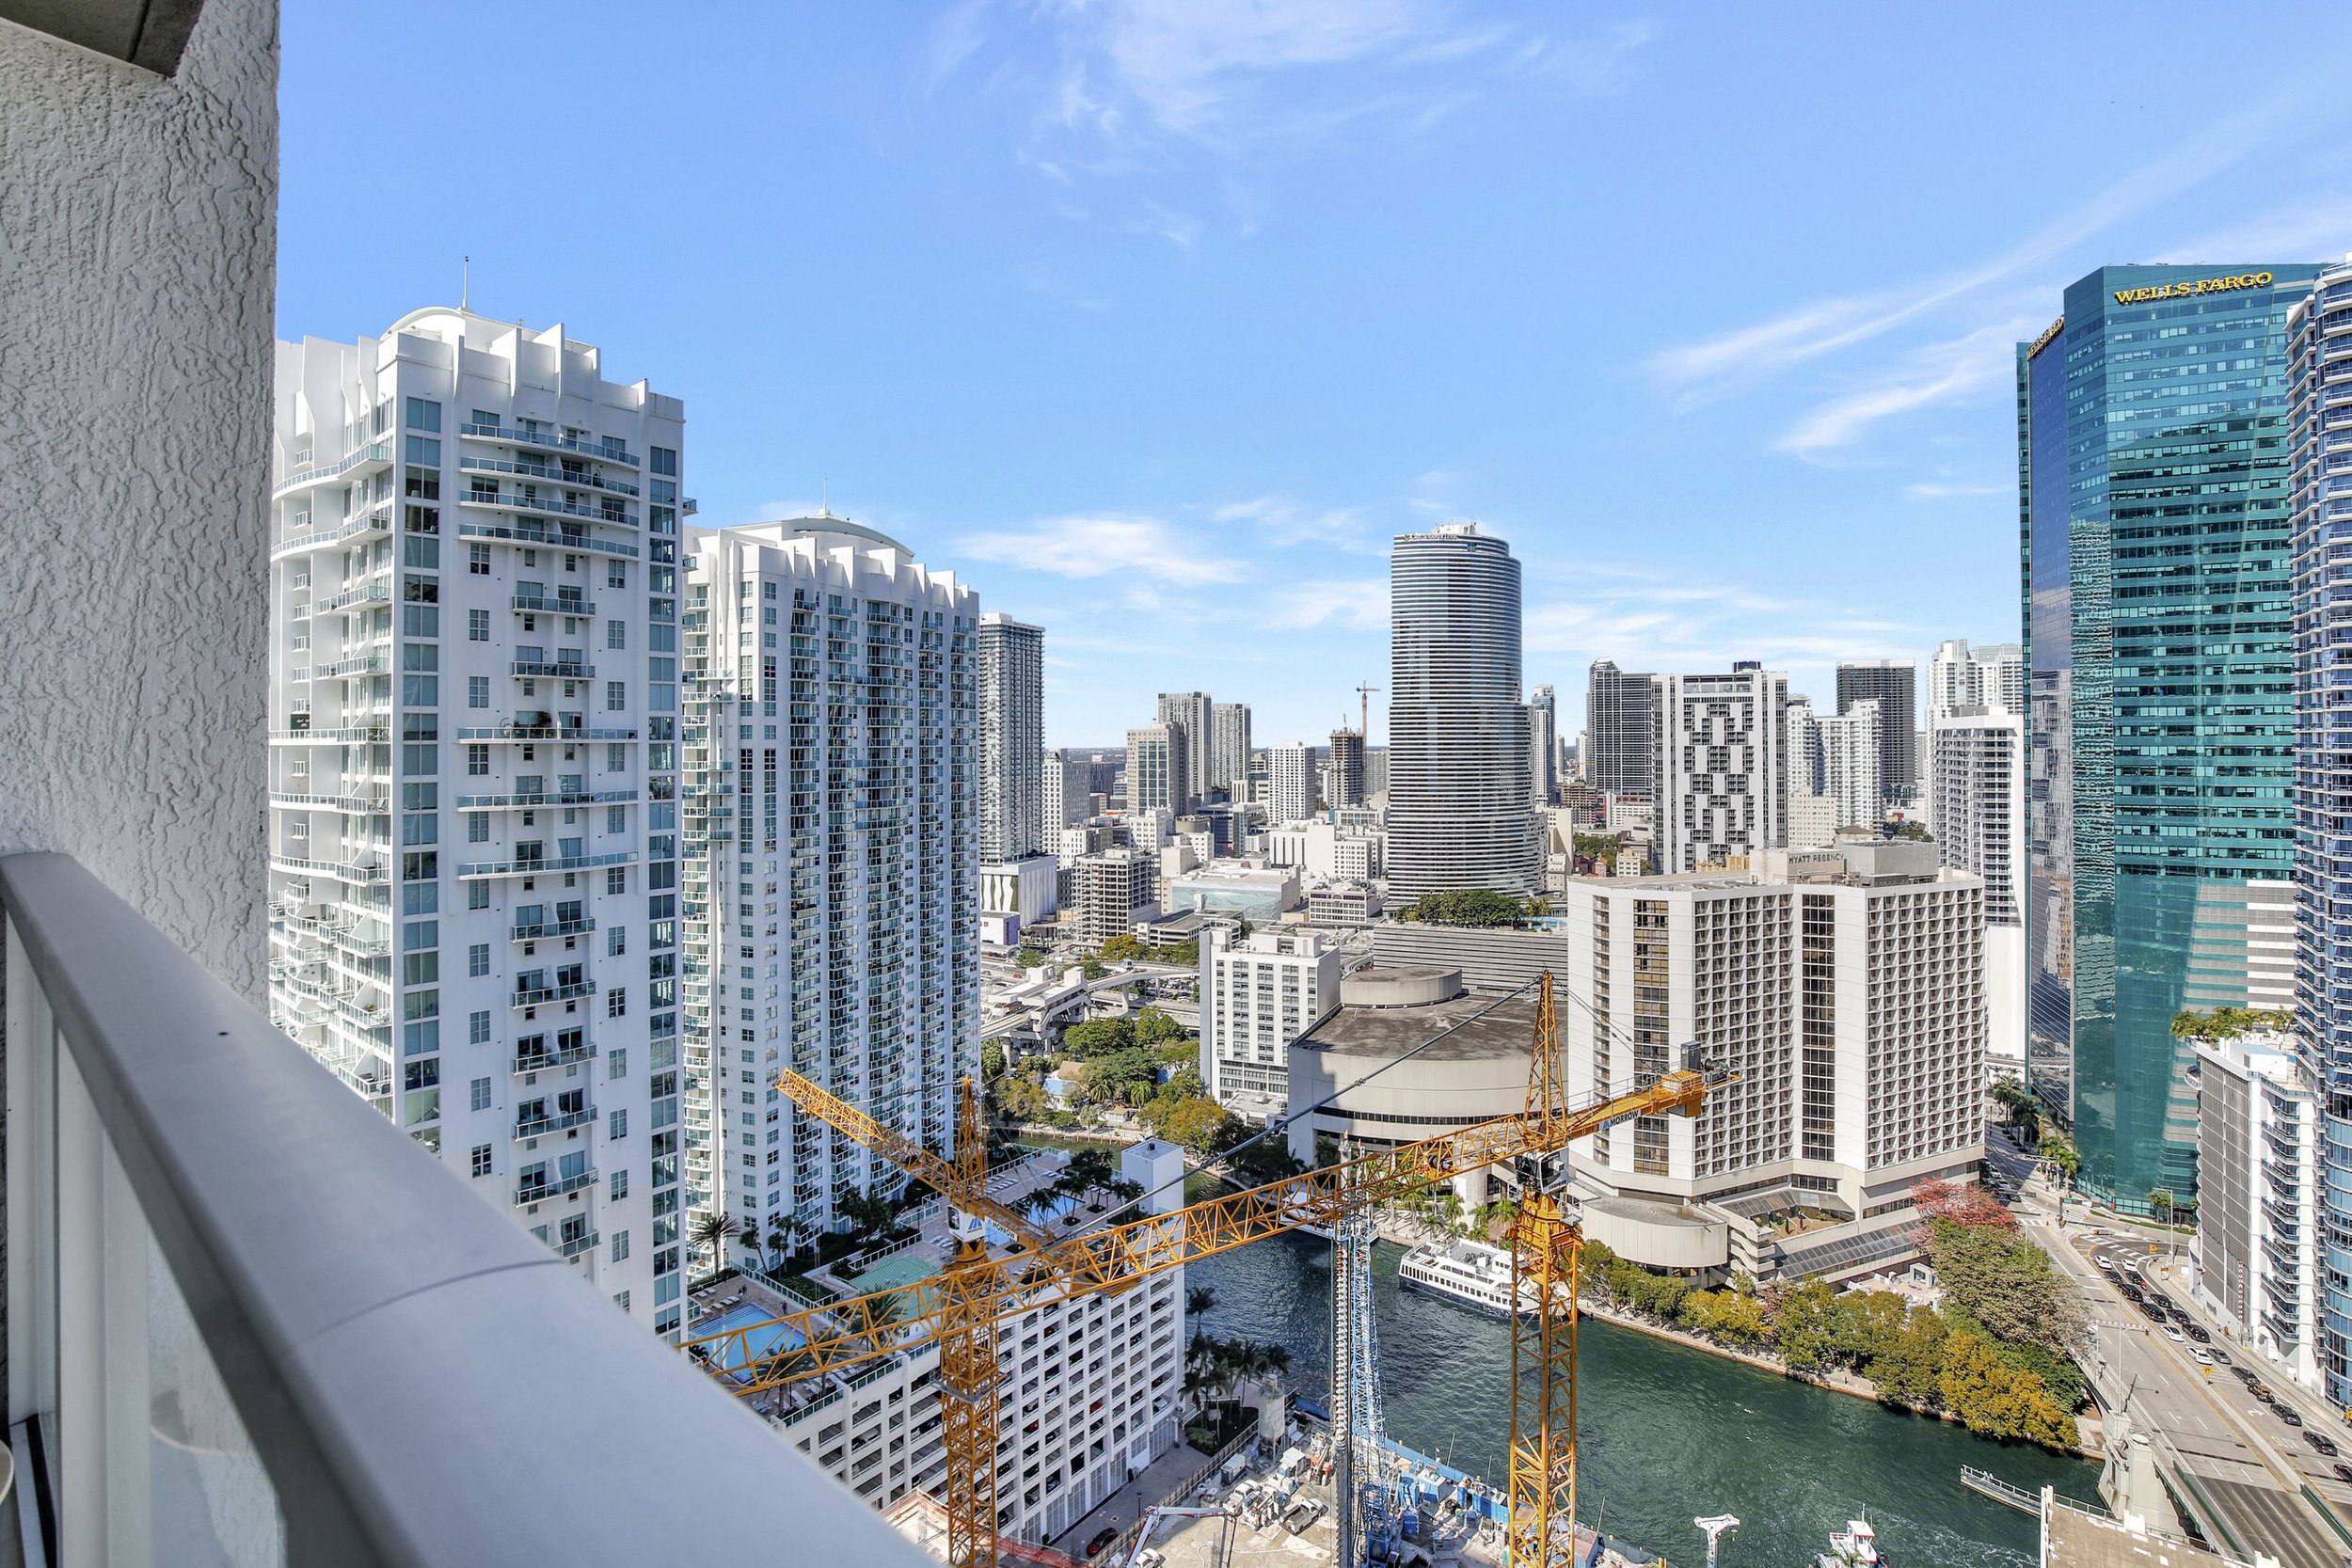 Check Out This Two-Bedroom Condo For Under $900K In Brickell 18.jpg